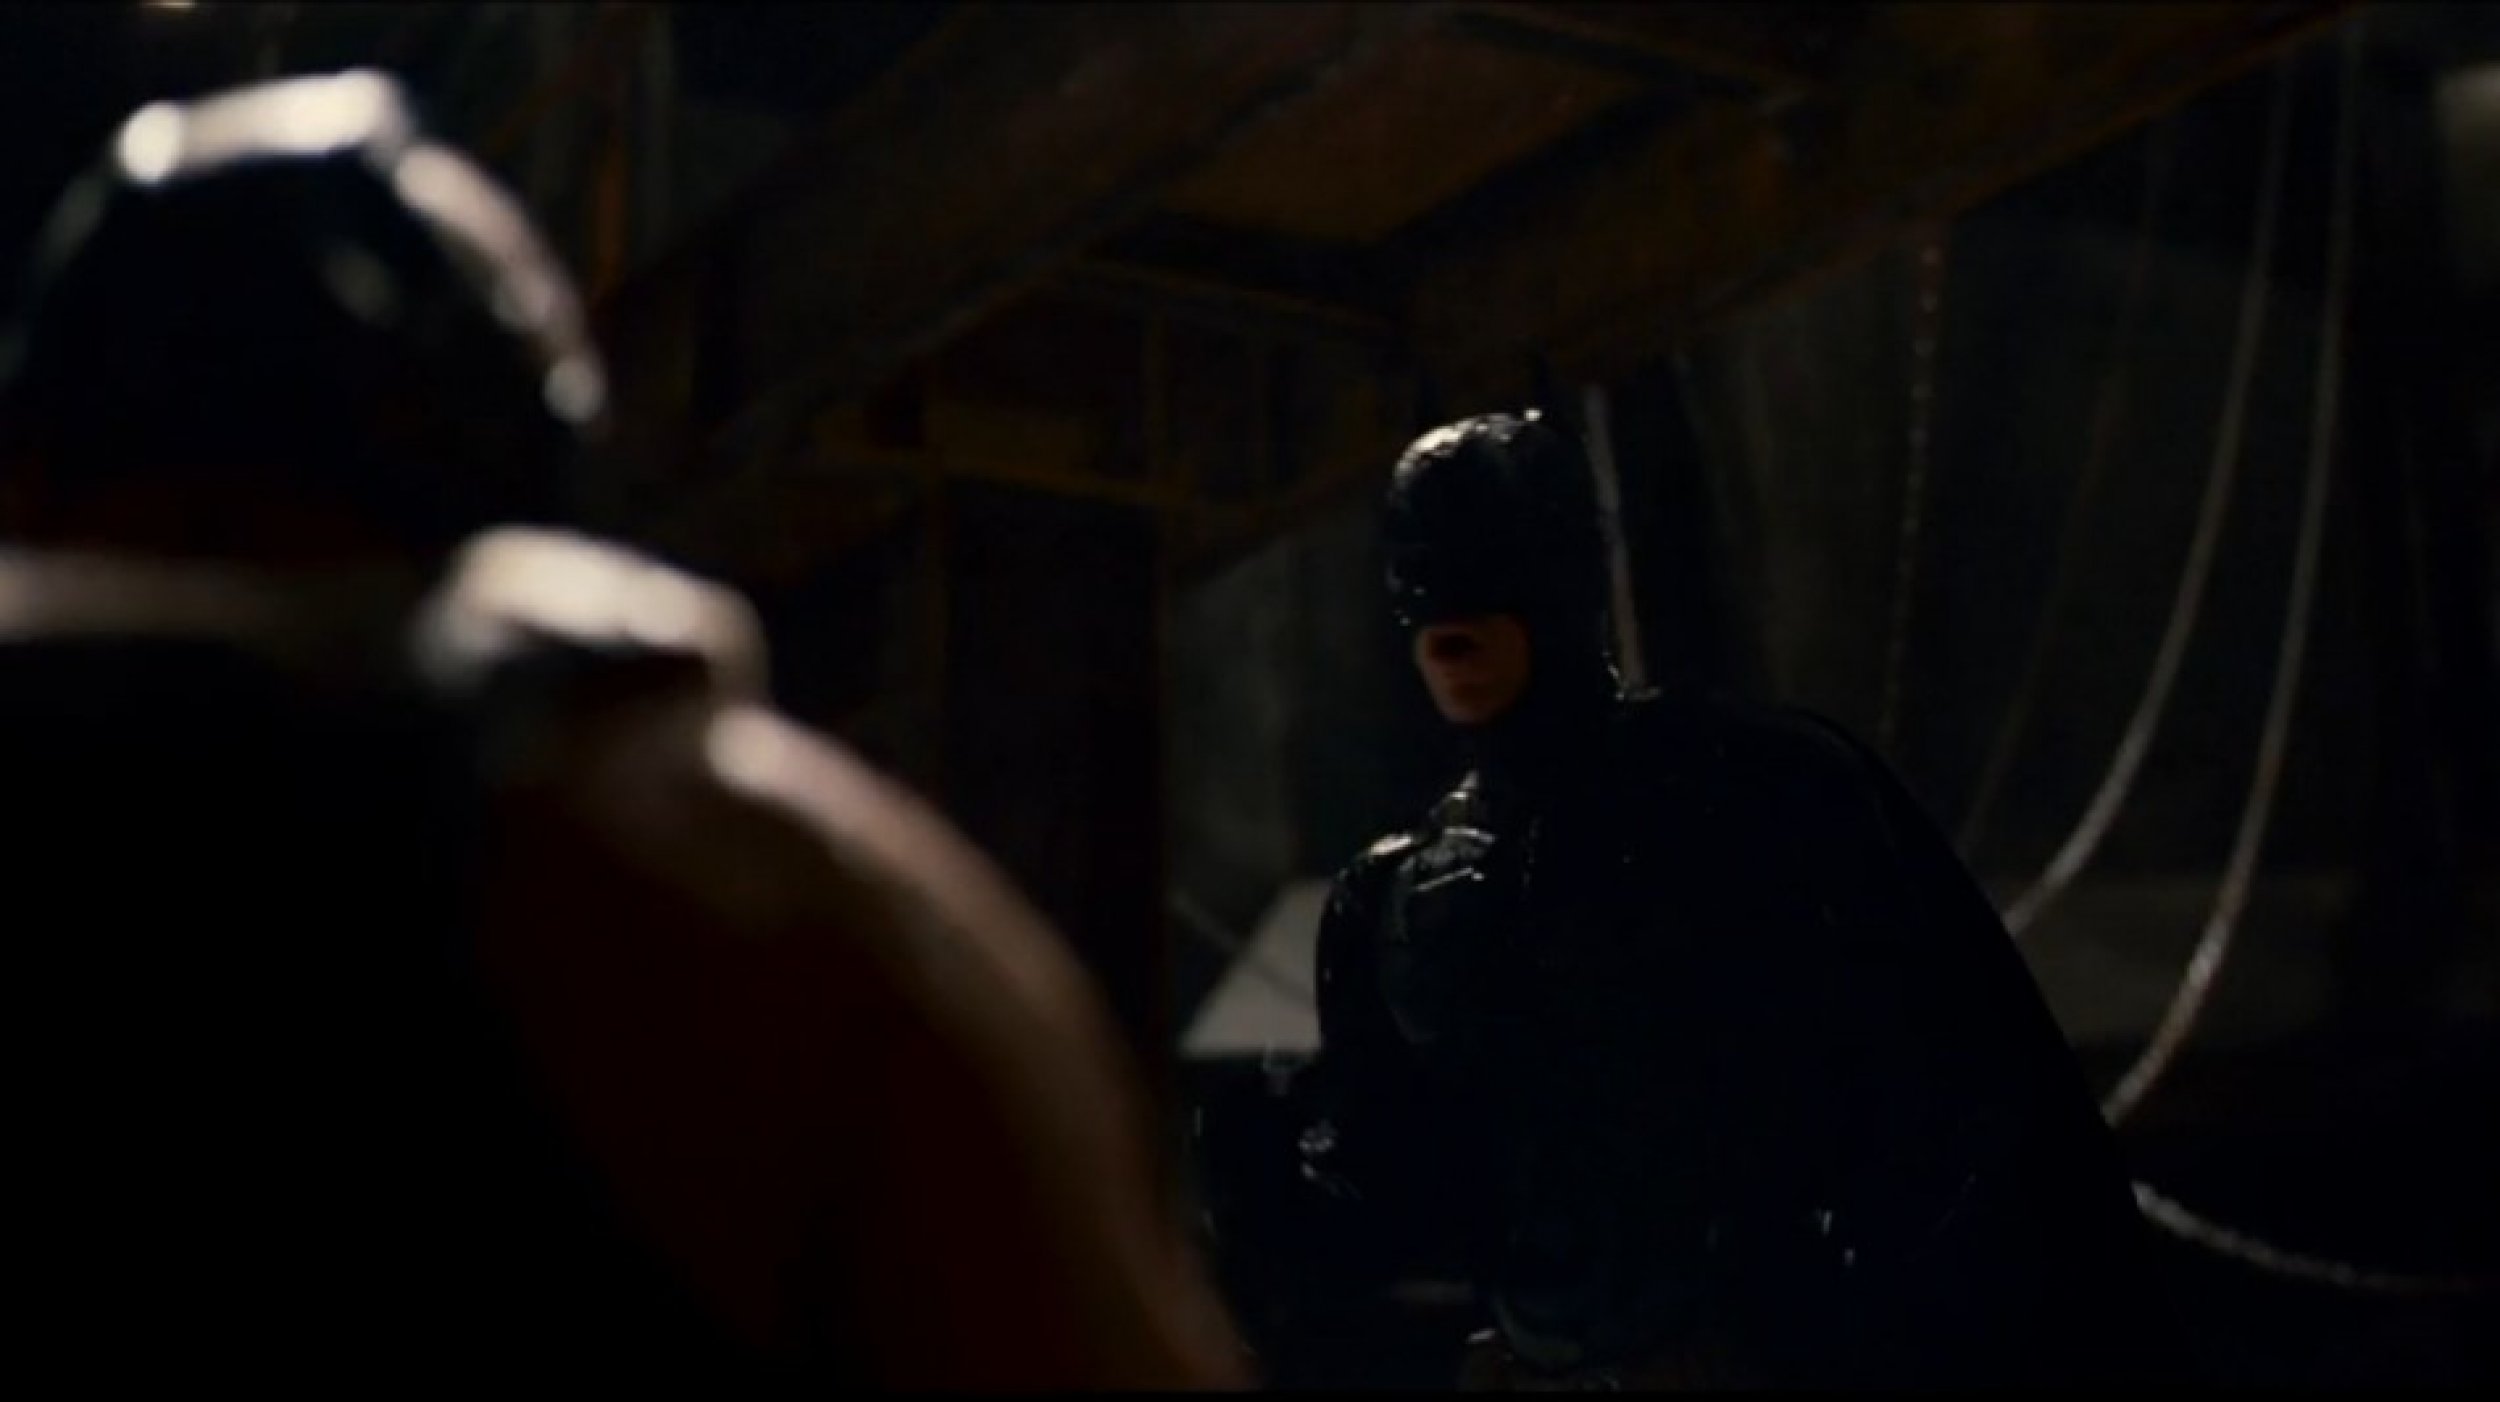 Dark Knight Rises Latest Pictures of Batman, Bane and Others.